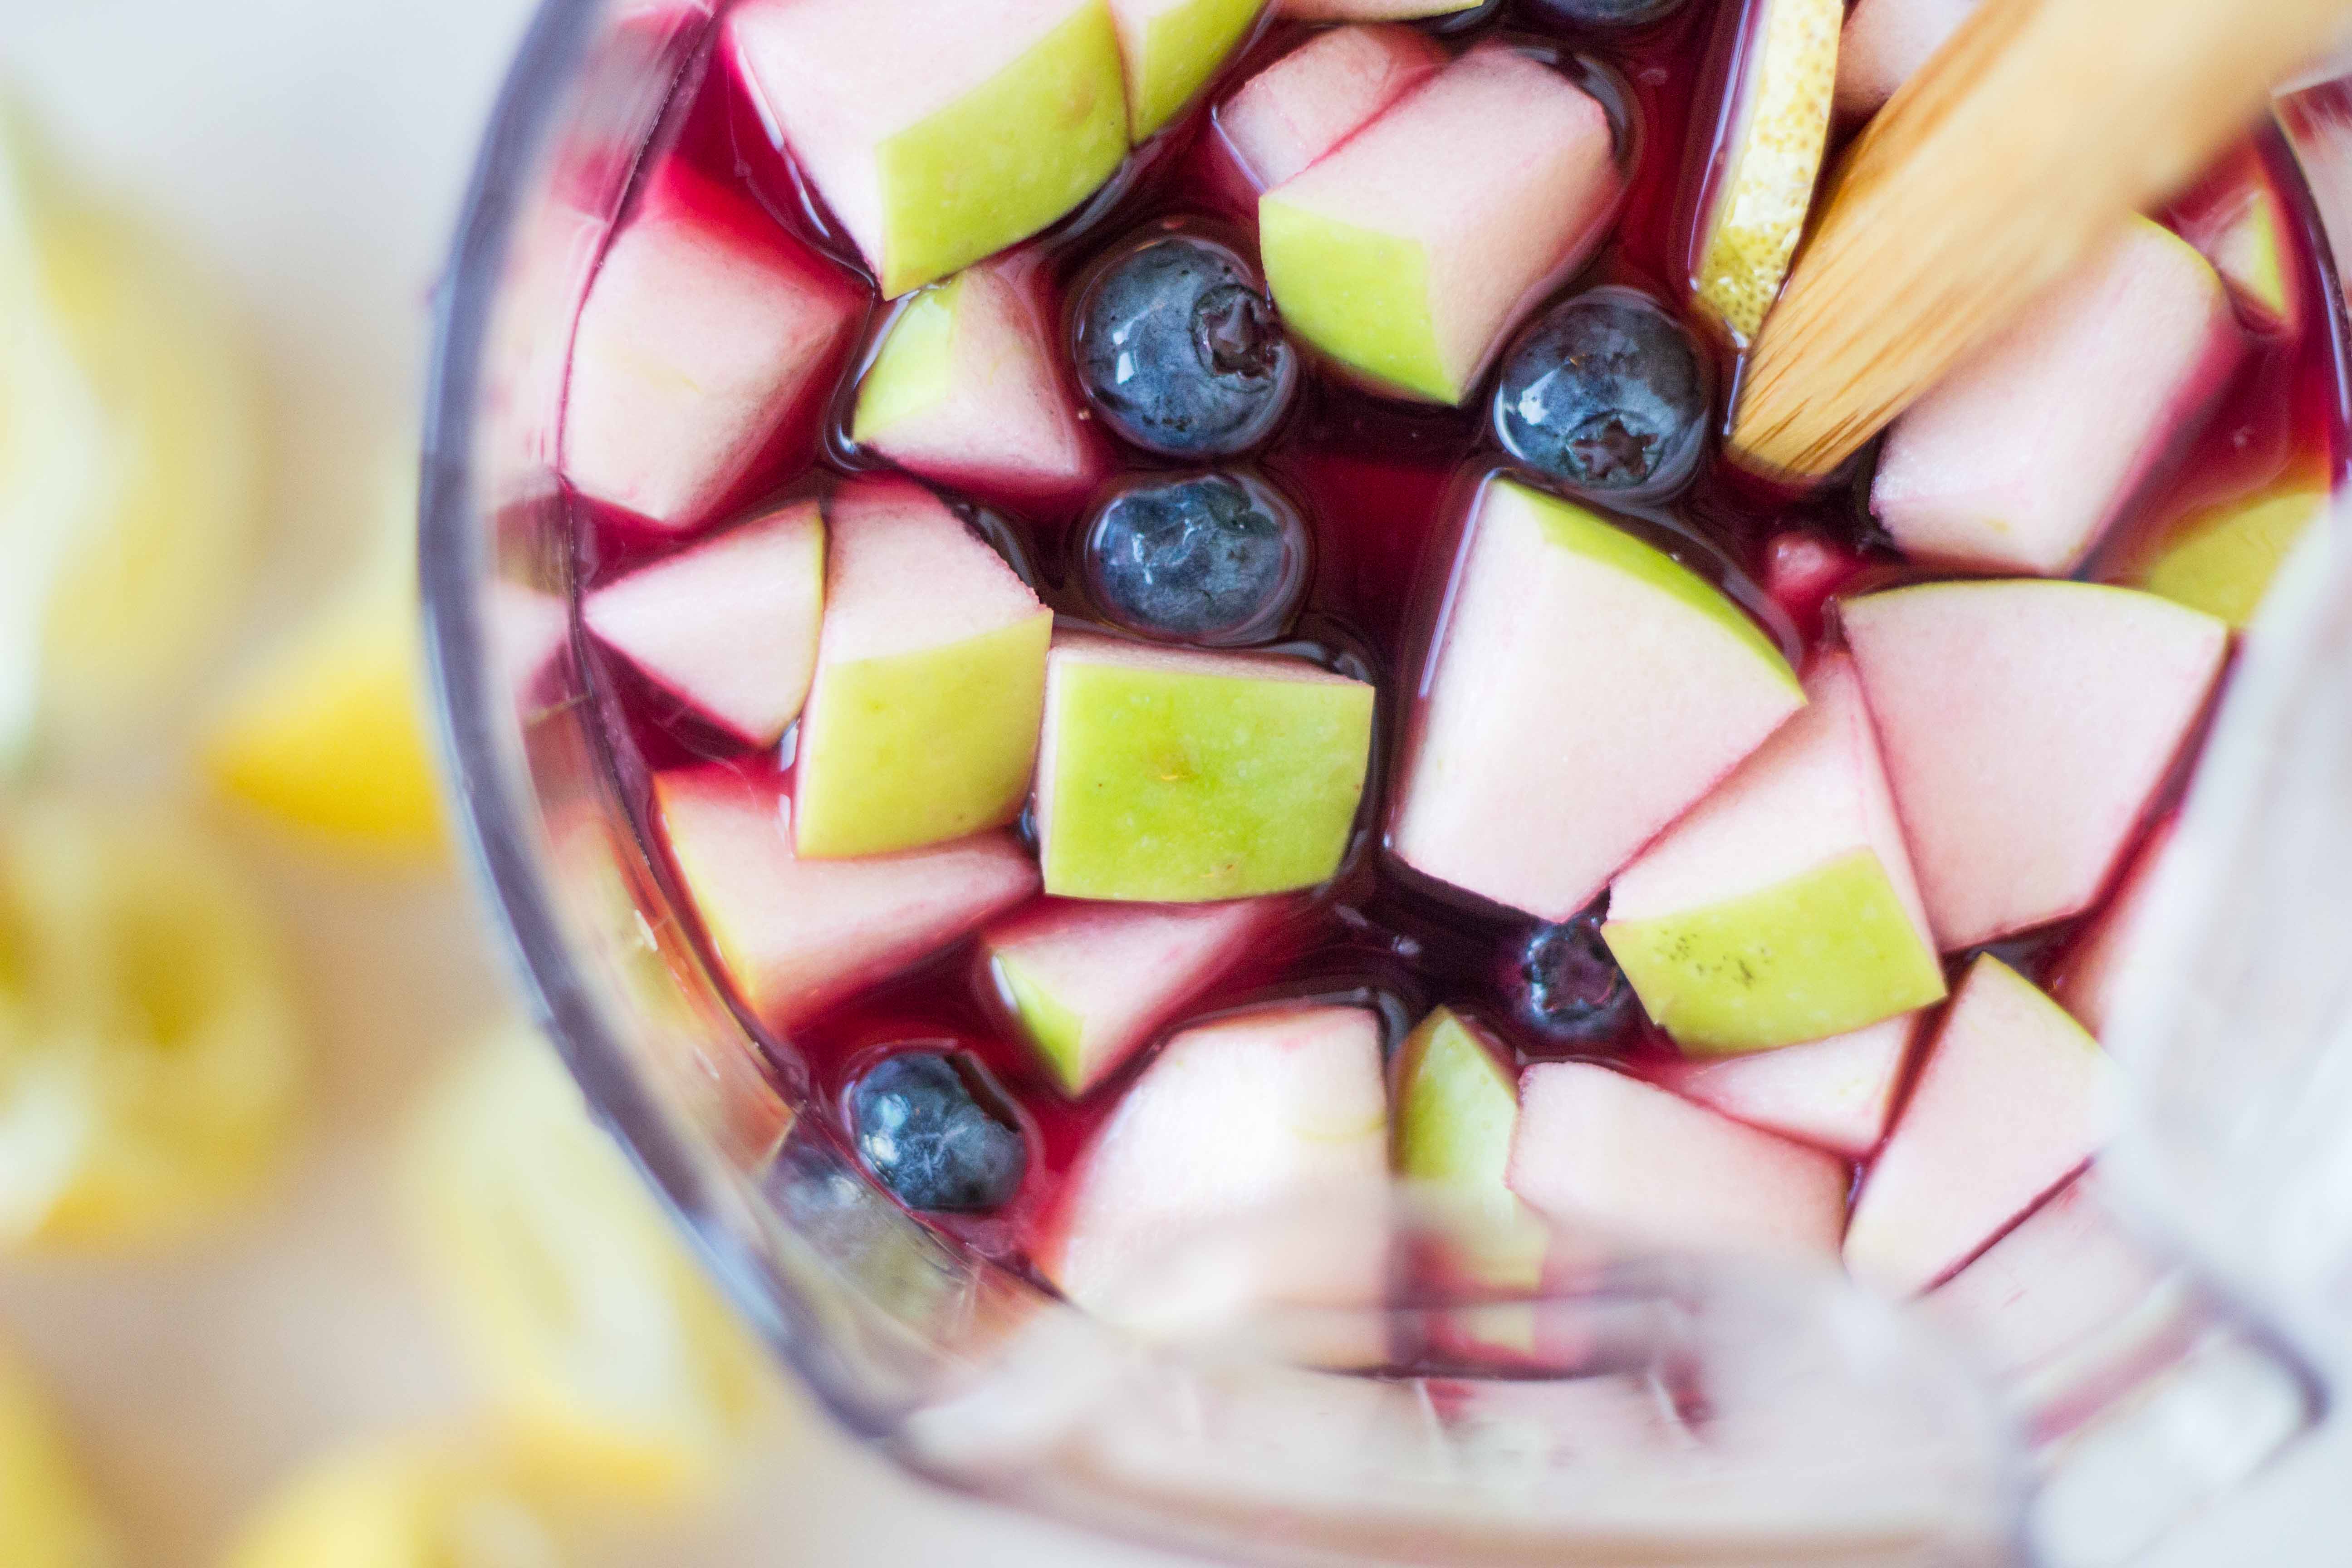 Red Wine Sangria | Veggie and the Beast